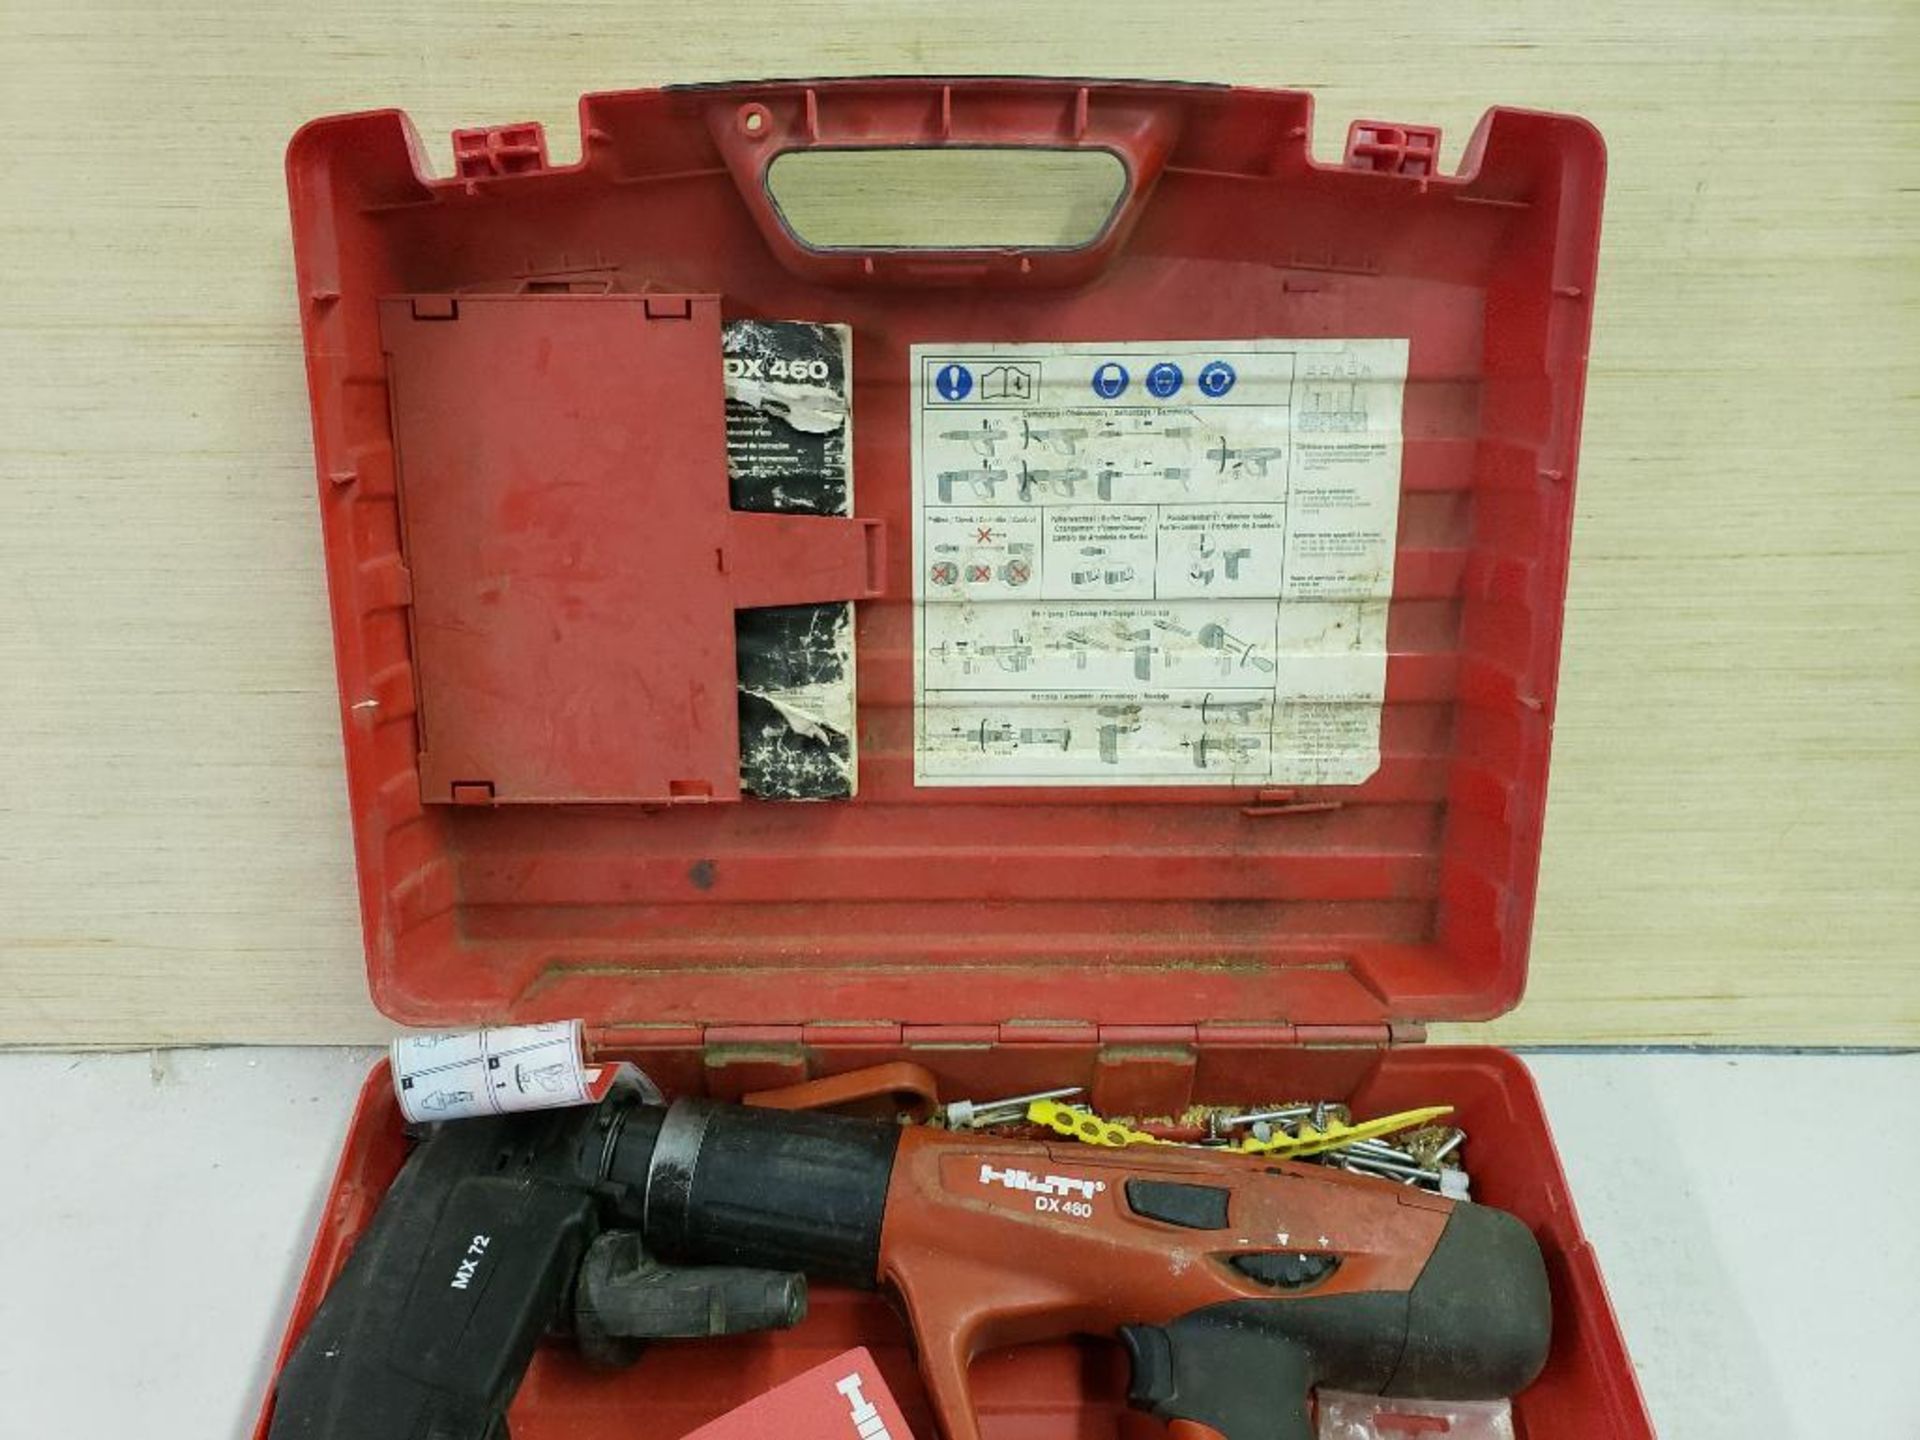 Hilti DX460 powder actuated fastening tool, with MX72 nail magazine. - Image 4 of 8